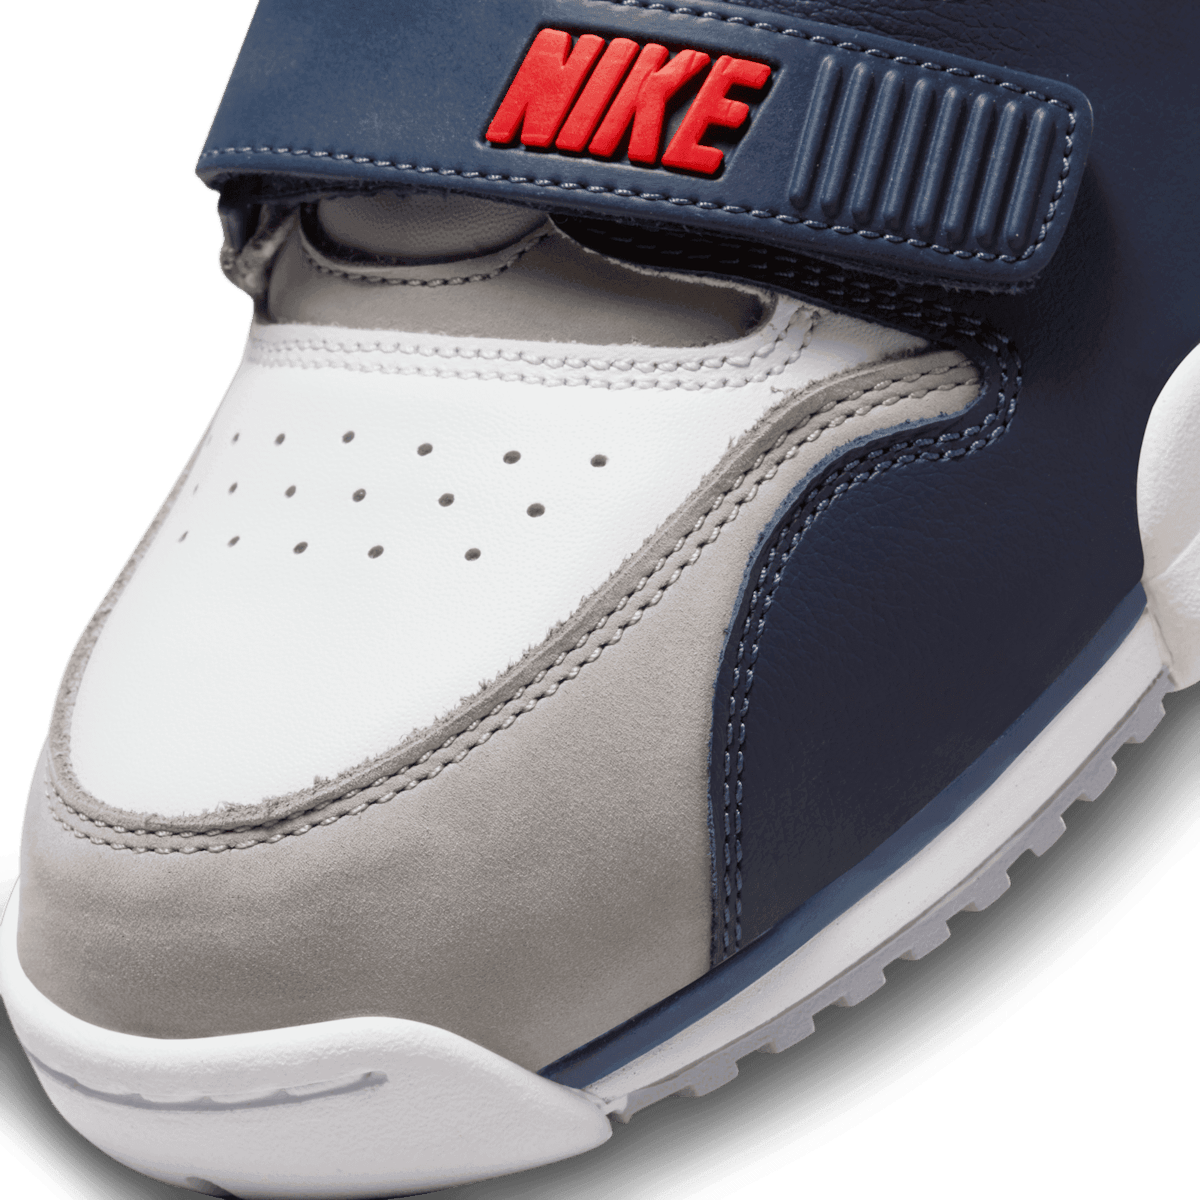 Nike Air Trainer 1 Midnight Navy Angle 4